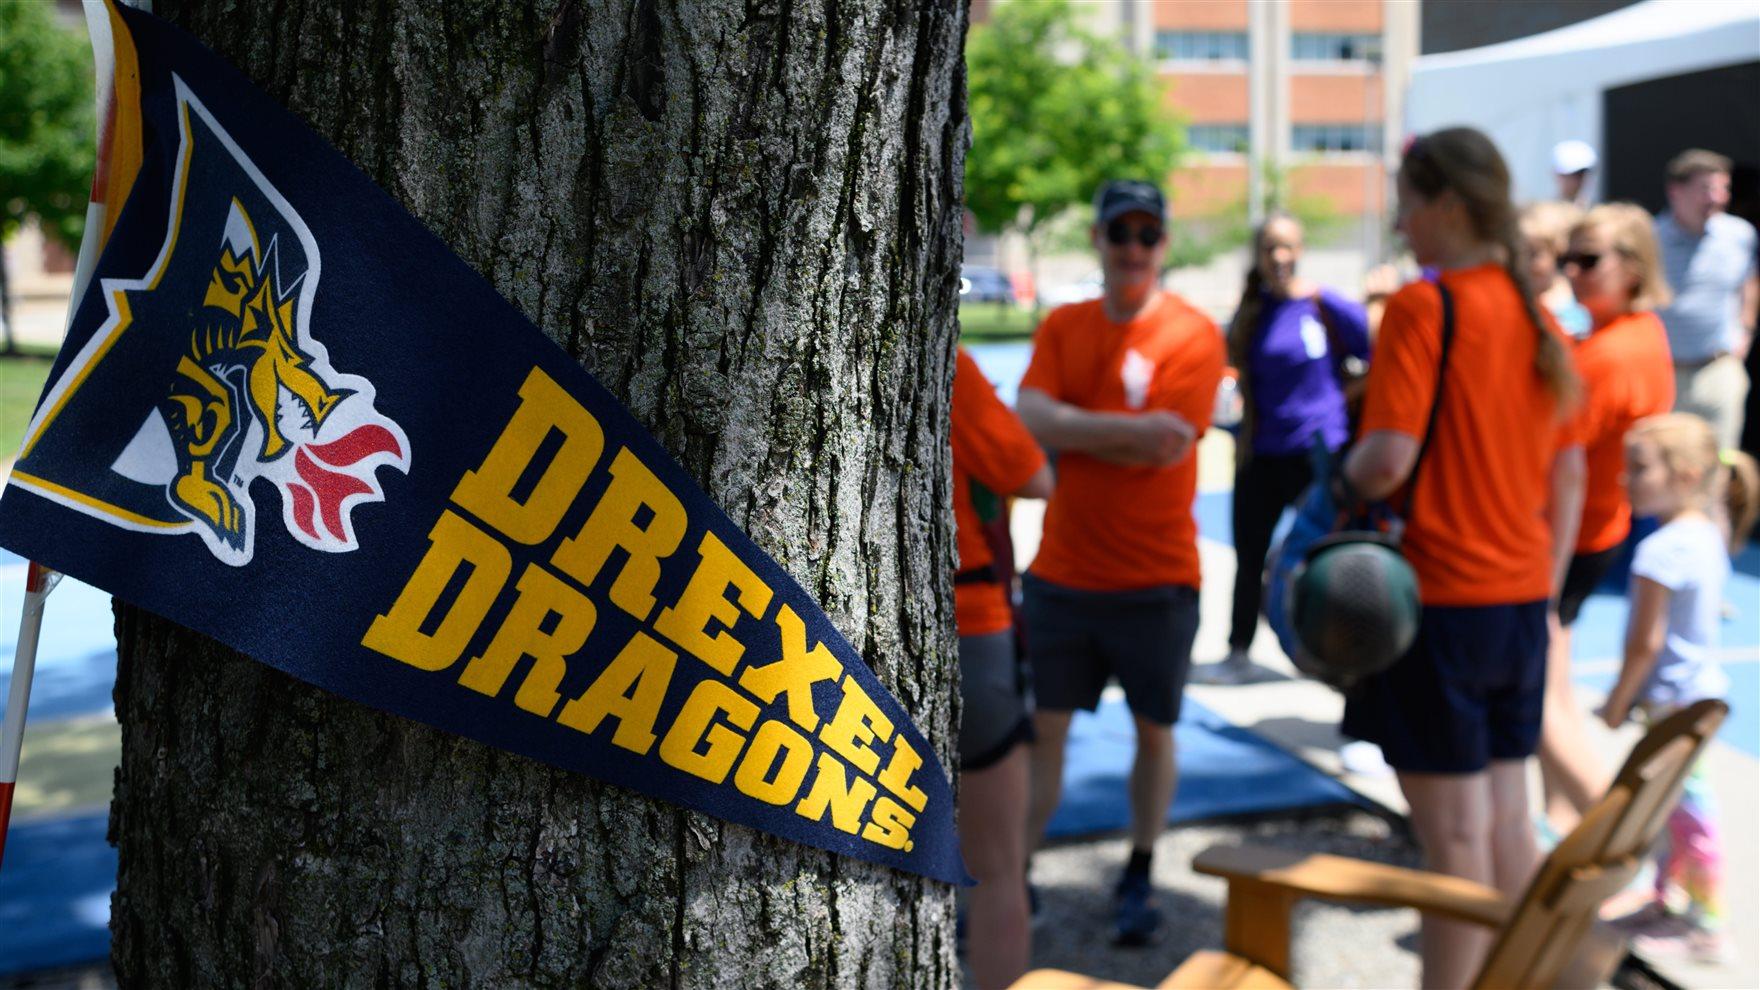 A &quot;Drexel Dragons&quot; flag pinned to a tree as participants of Employee Olympics gather in the background.